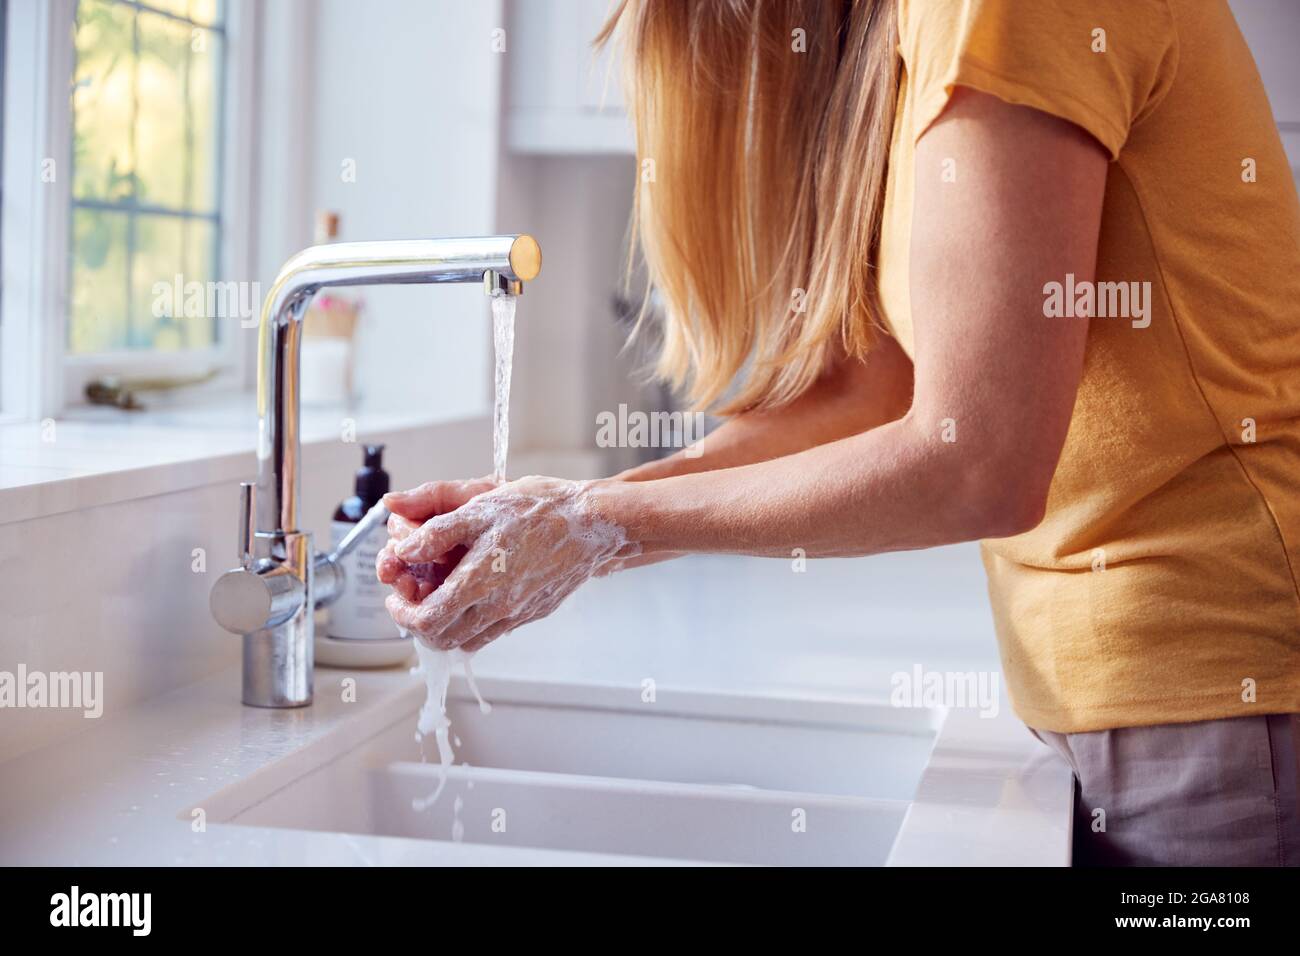 Close Up Of Mature Woman Washing Hands In Kitchen Sink Stock Photo